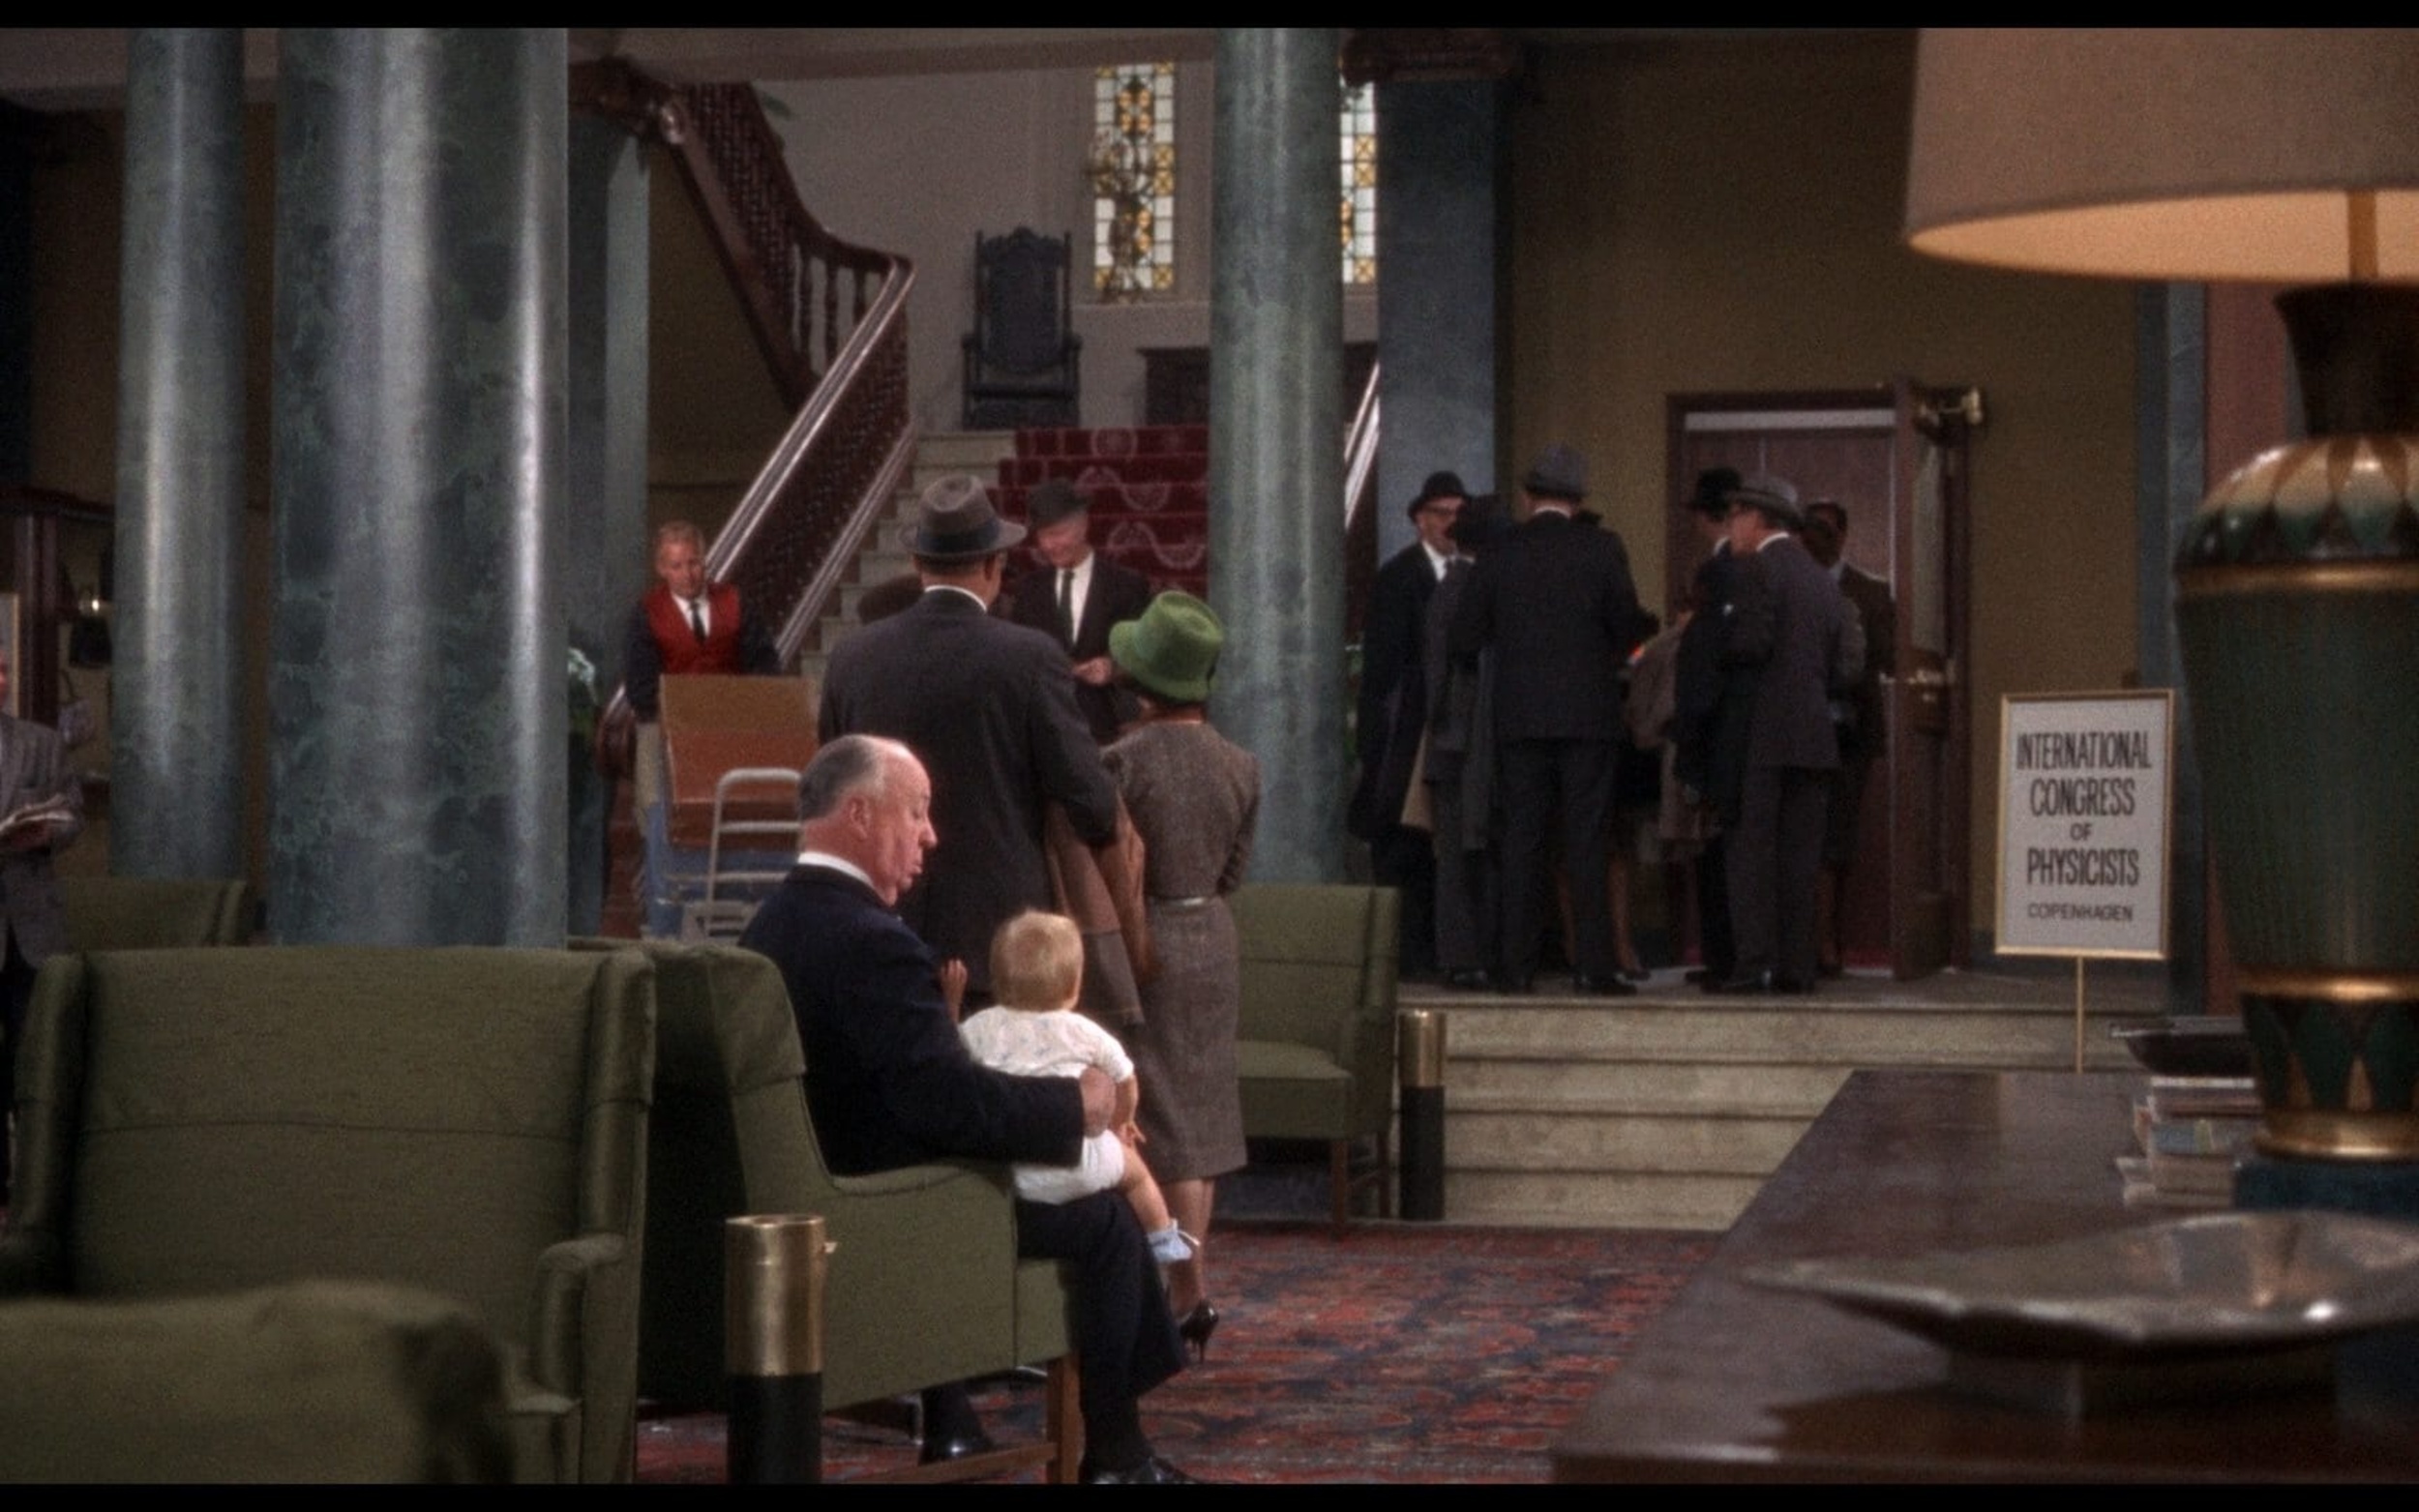 <p>Speaking of calling attention to himself, Hitchcock is seen in a hotel in Copenhagen in “Torn Curtain” with a baby on his lap. During the time he is on screen the music changes. What does the music change to? Why, “Funeral March of the Marionette” of course. That’s also known as the theme song to “Alfred Hitchcock Presents.”</p>